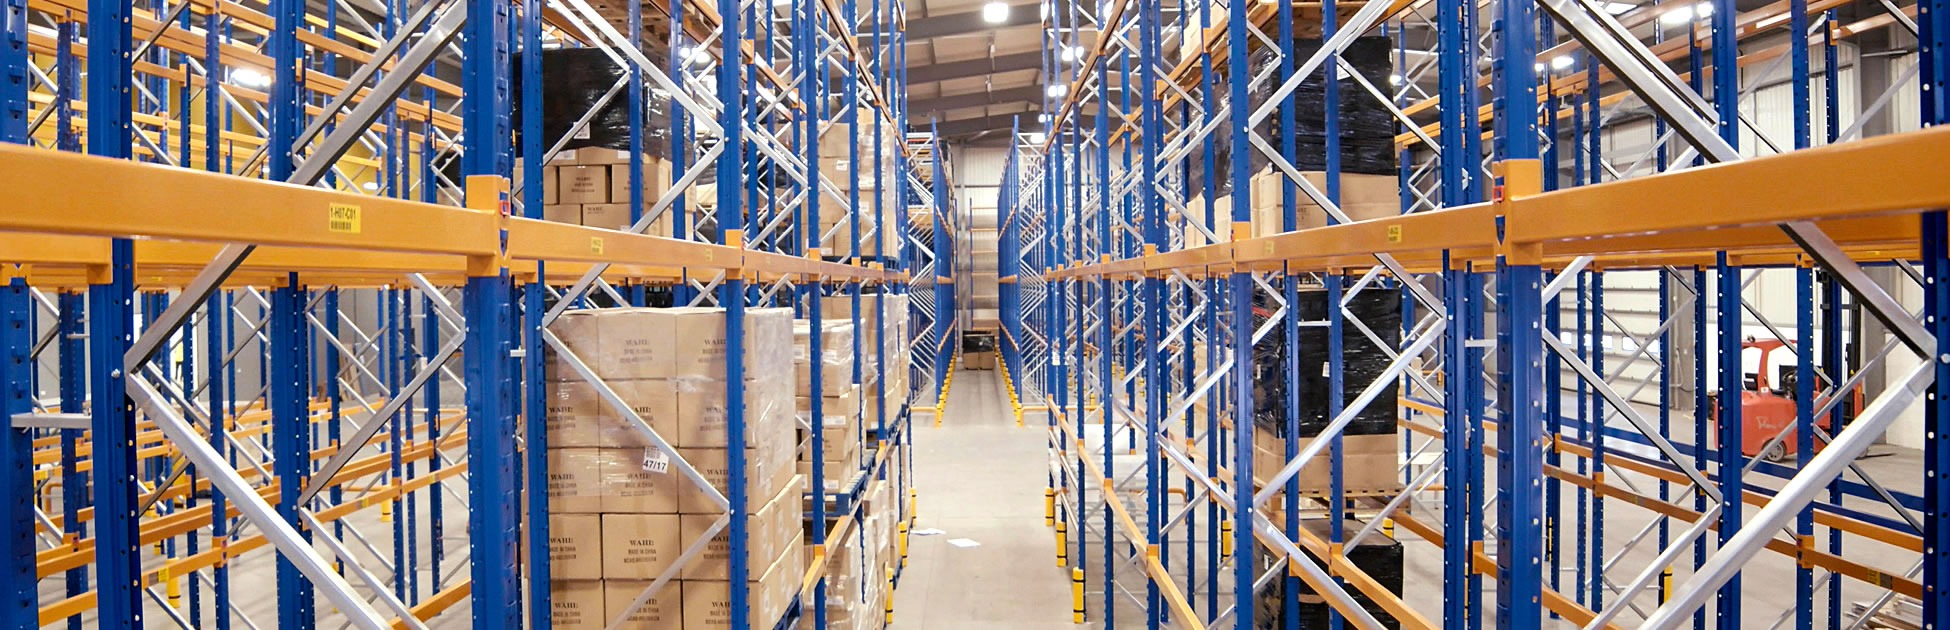 Why great back-of-house storage is the key to retail success